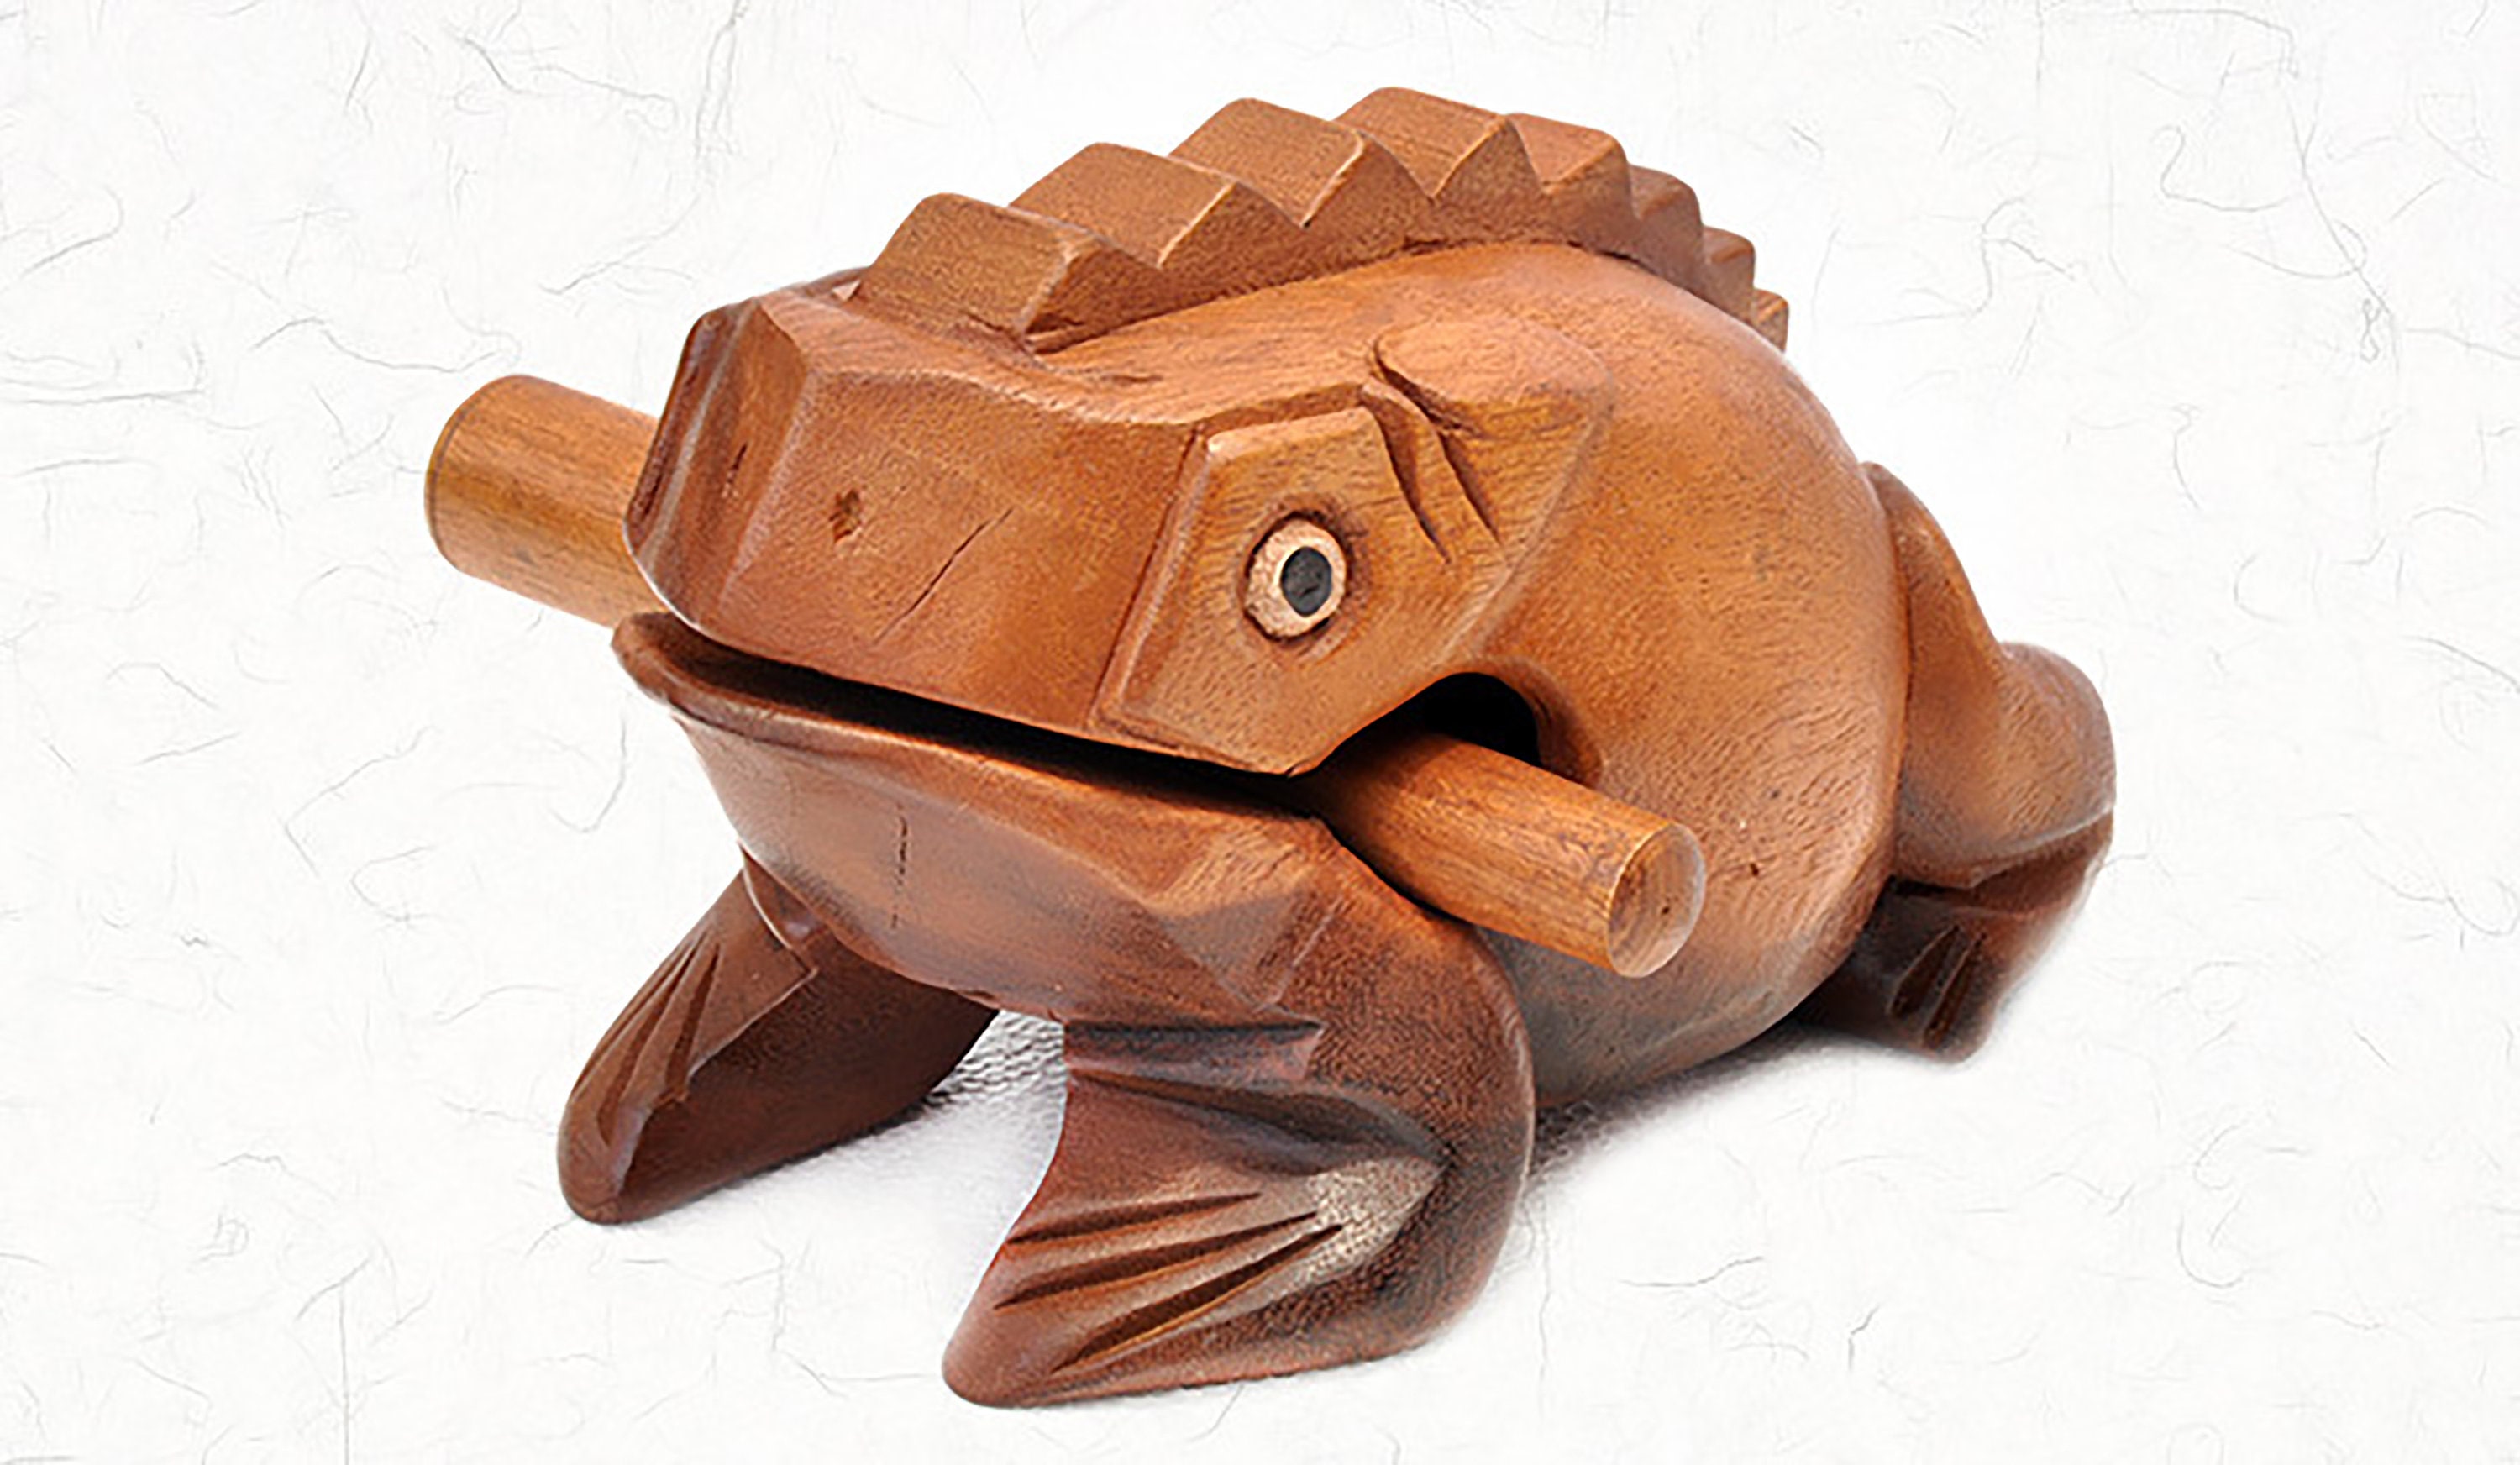 Wooden Pull Along Frog with Drum - The Bohemian Collective